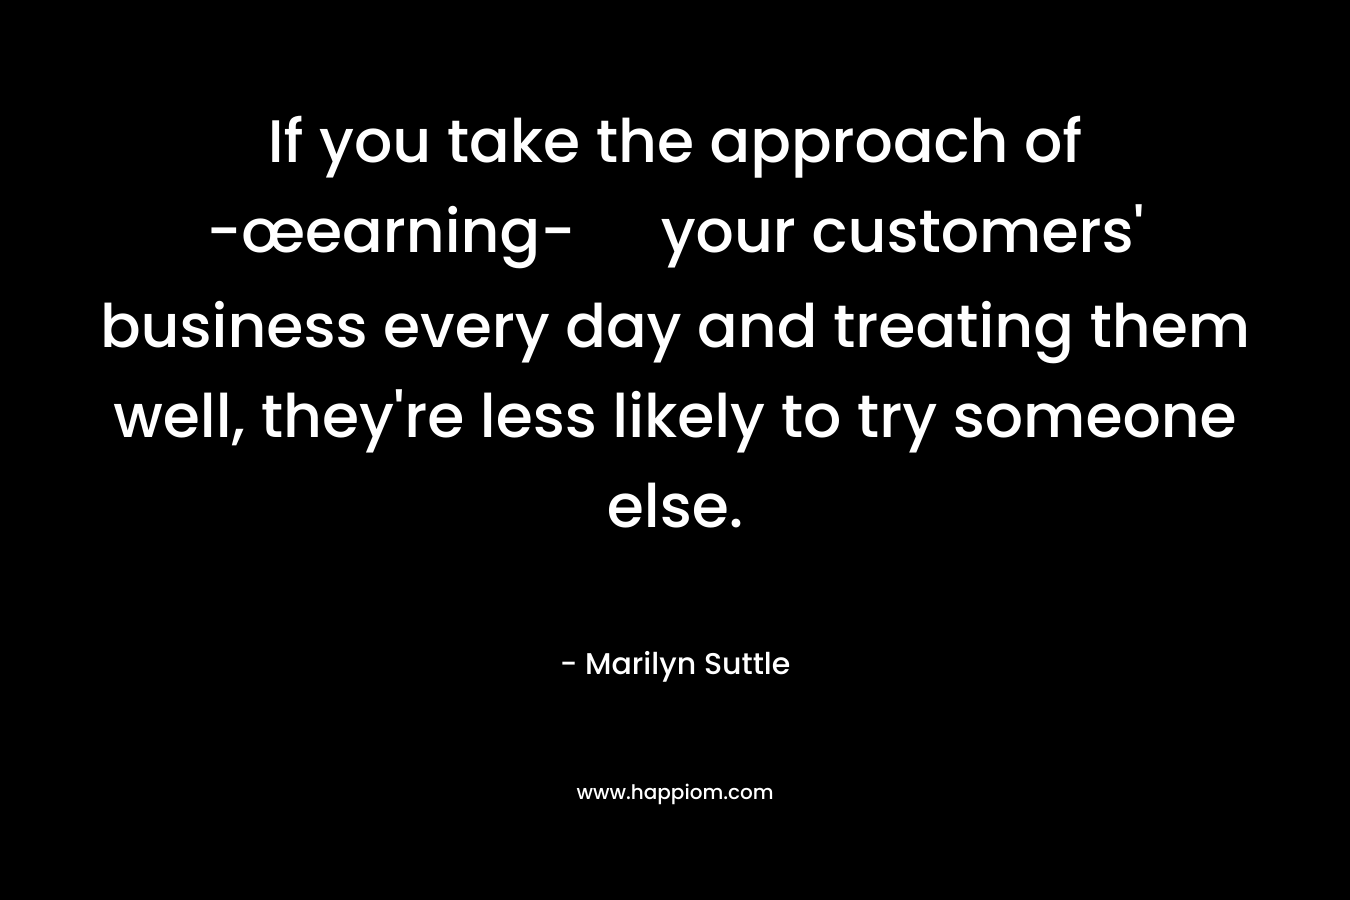 If you take the approach of -œearning- your customers’ business every day and treating them well, they’re less likely to try someone else. – Marilyn Suttle